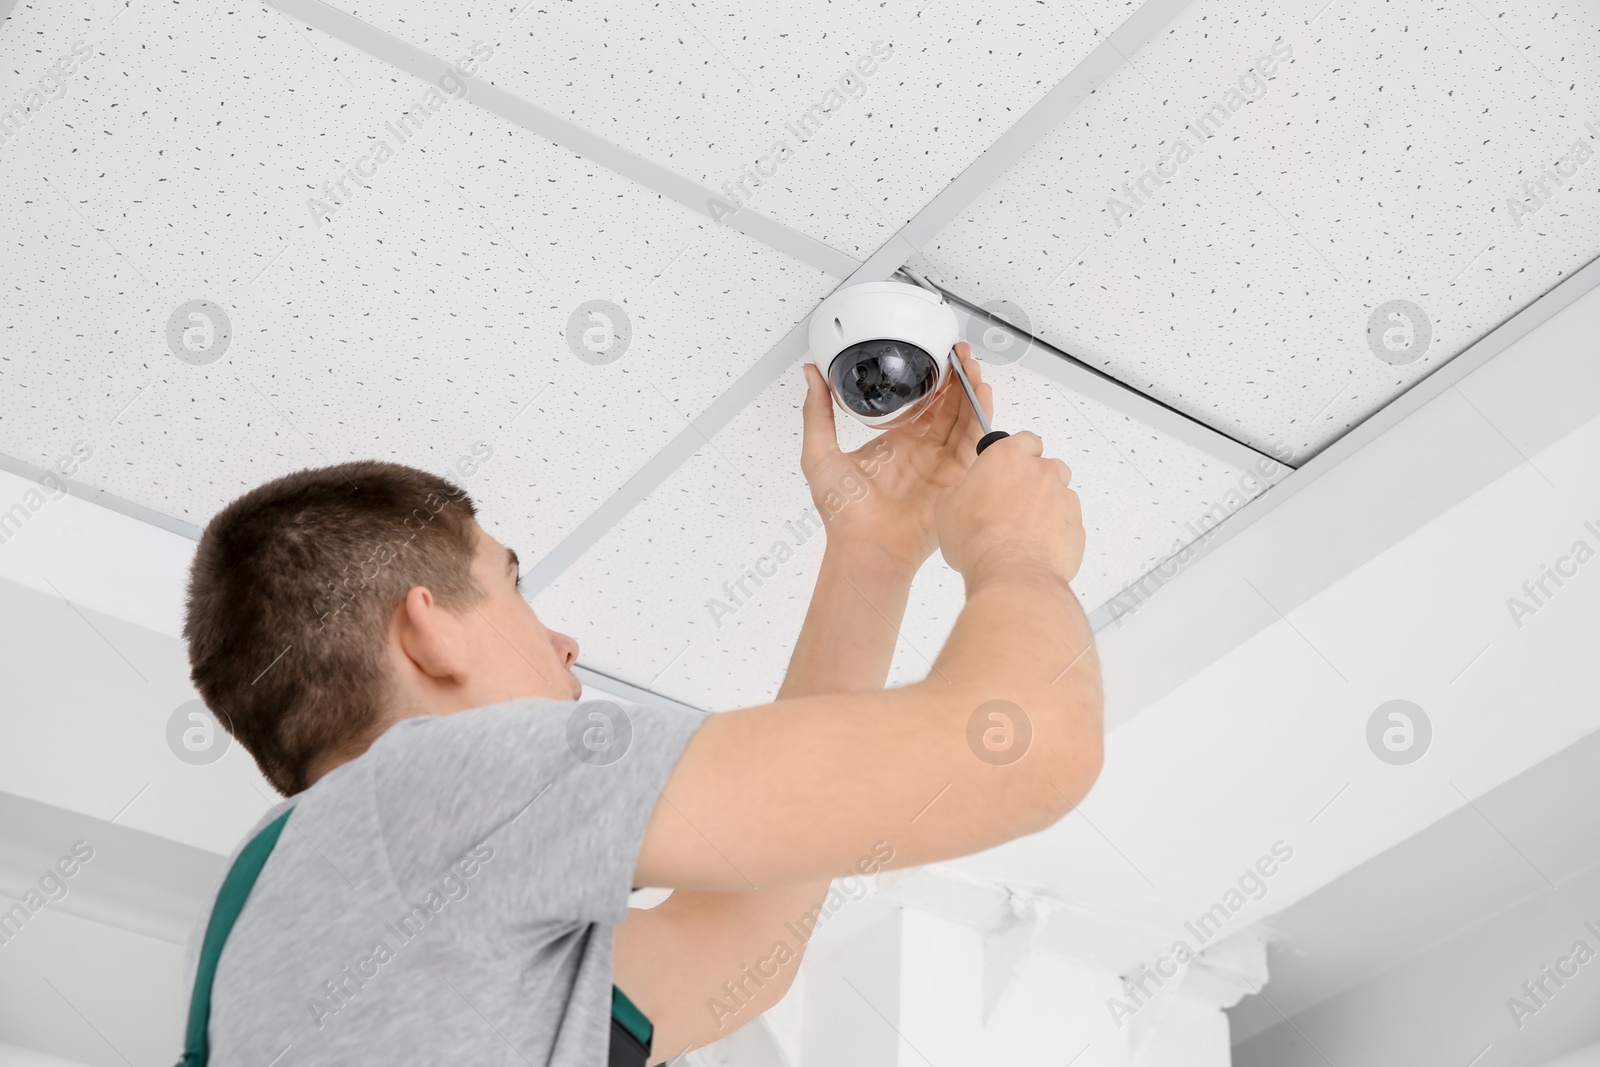 Photo of Technician with screwdriver installing CCTV camera on ceiling indoors, low angle view